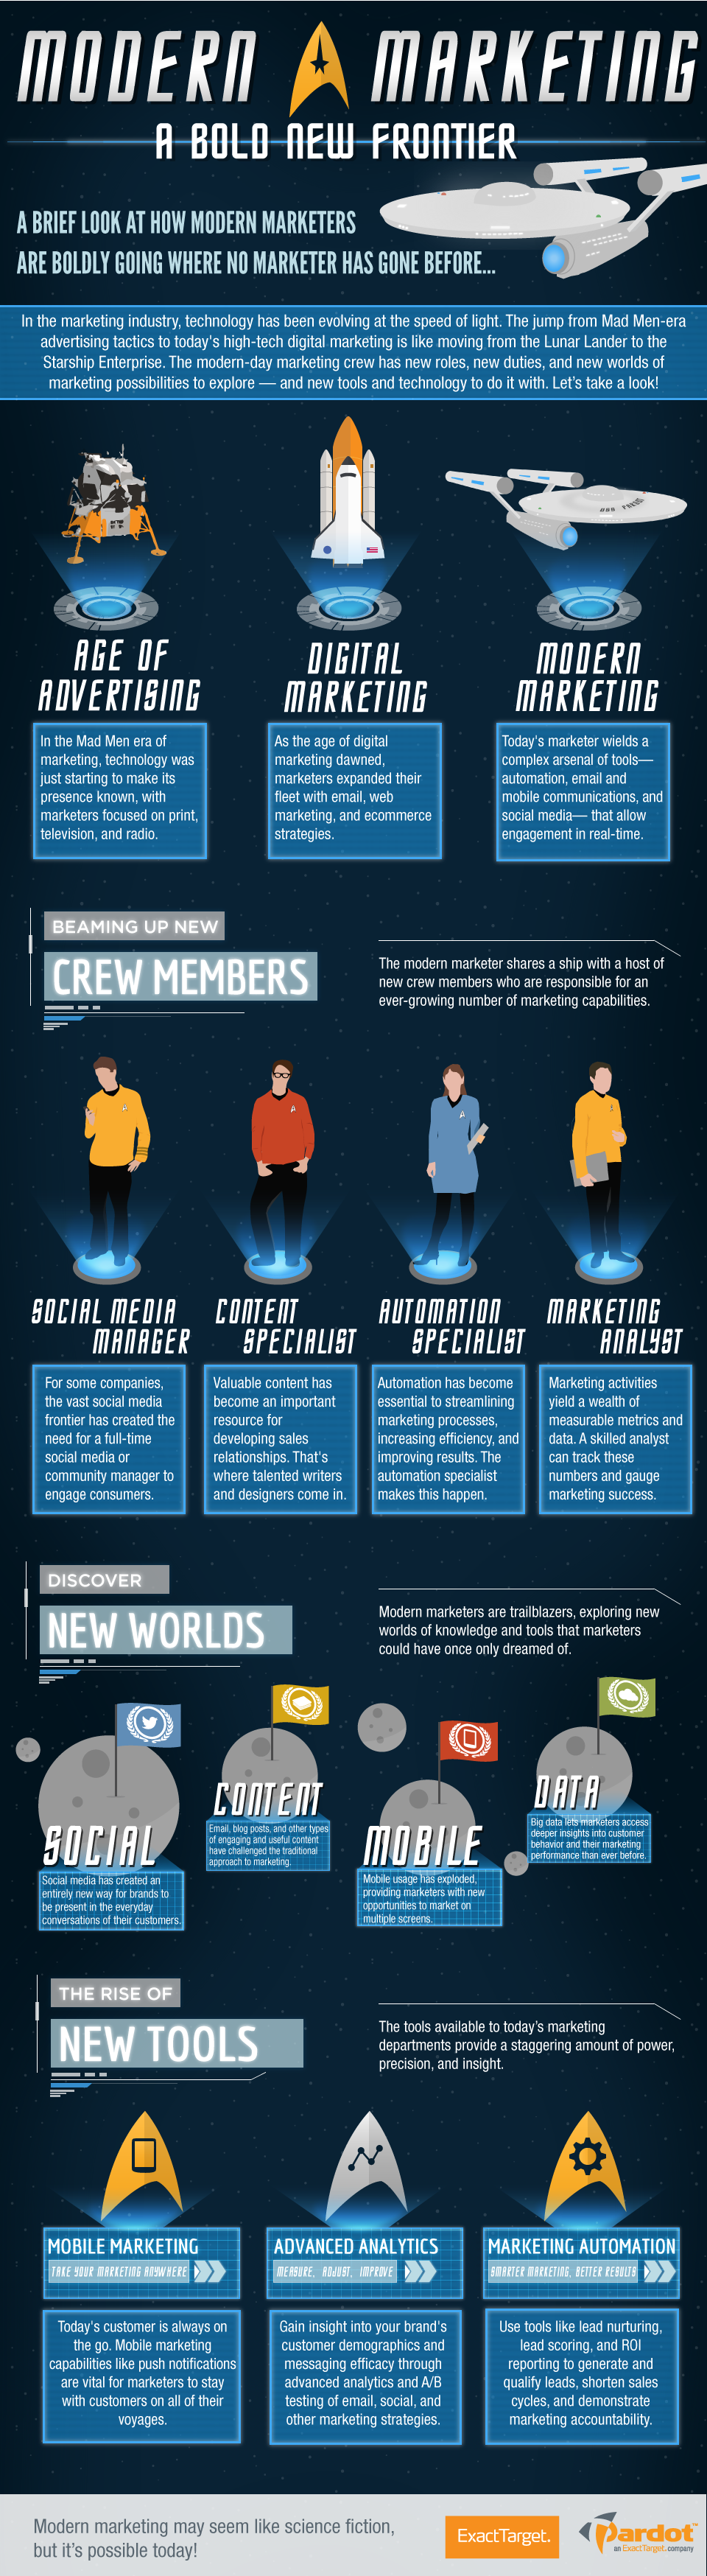 Modern Marketing: A Bold New Frontier [INFOGRAPHIC] - ExactTarget Infographic